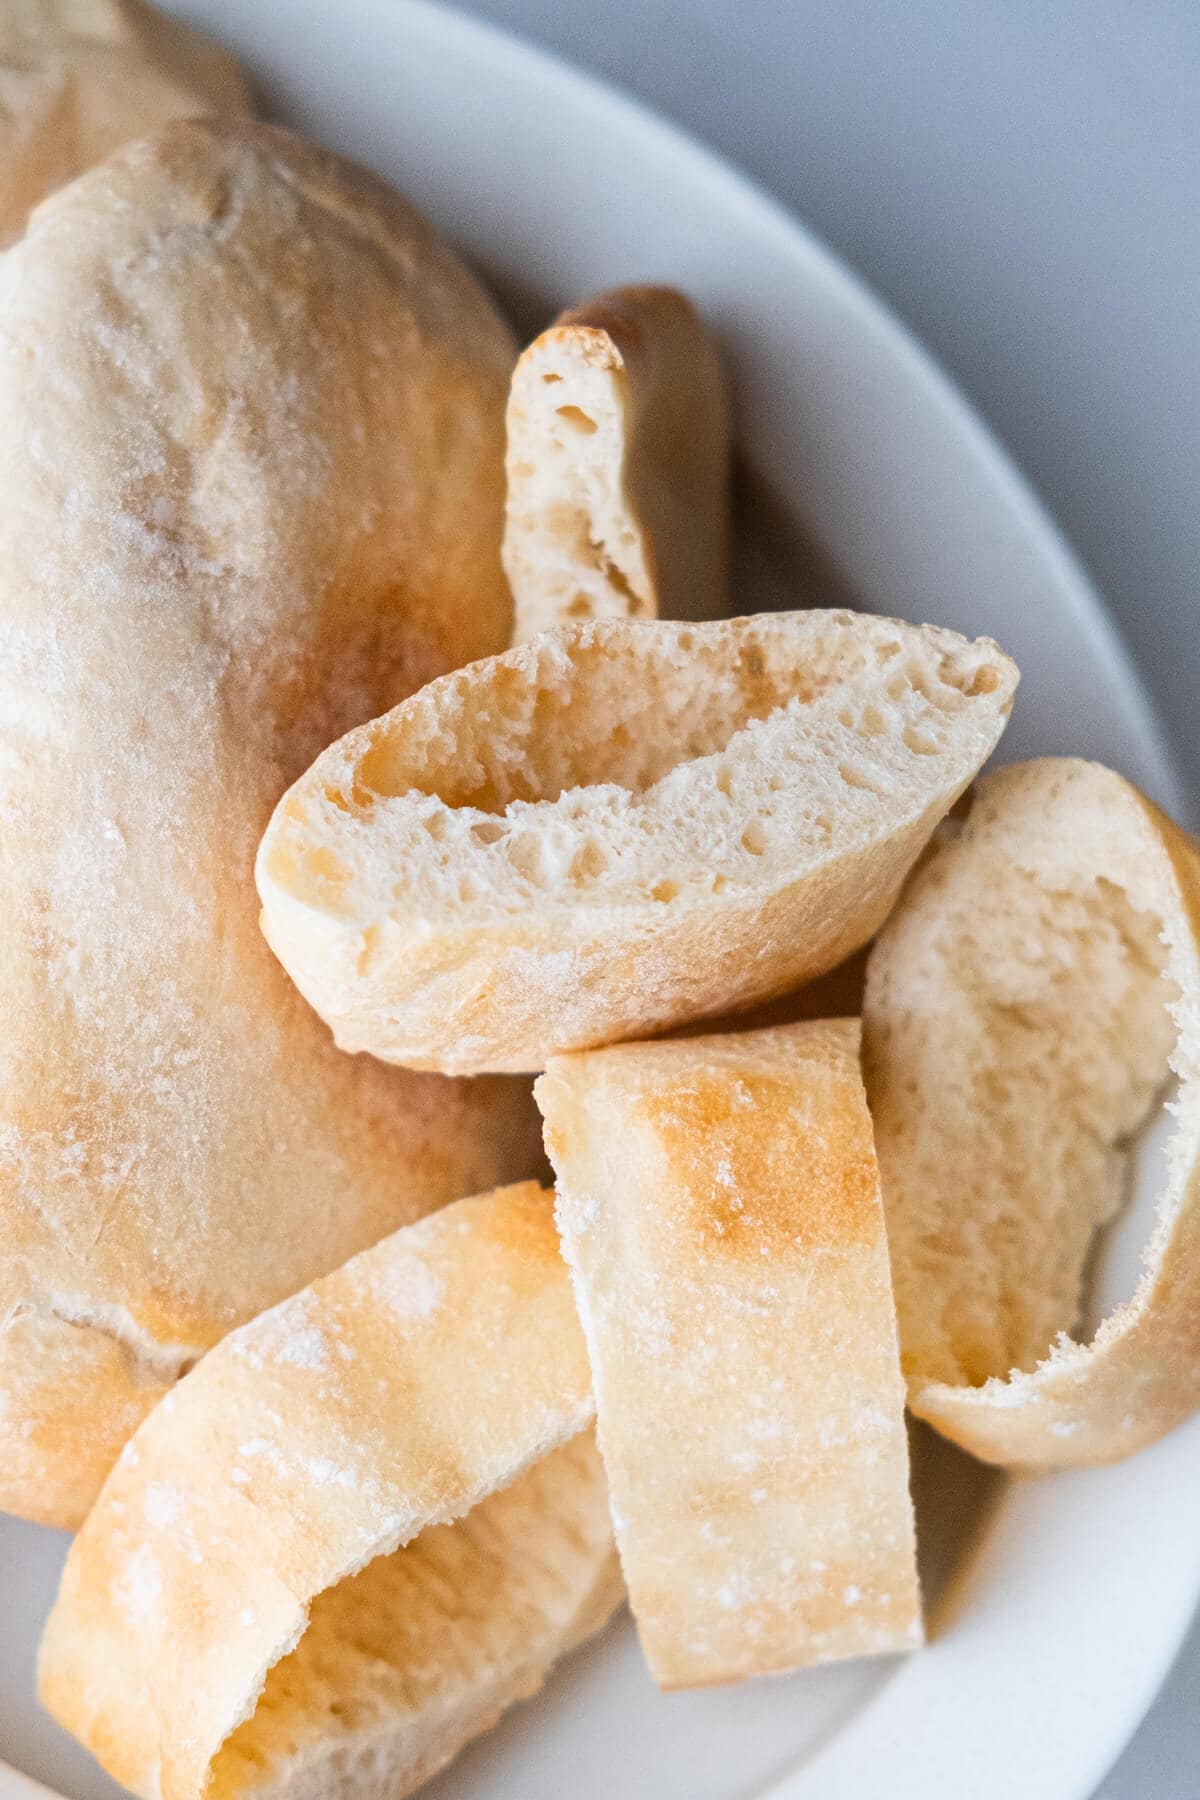 soft and puffy pita bread cut into small pieces. 